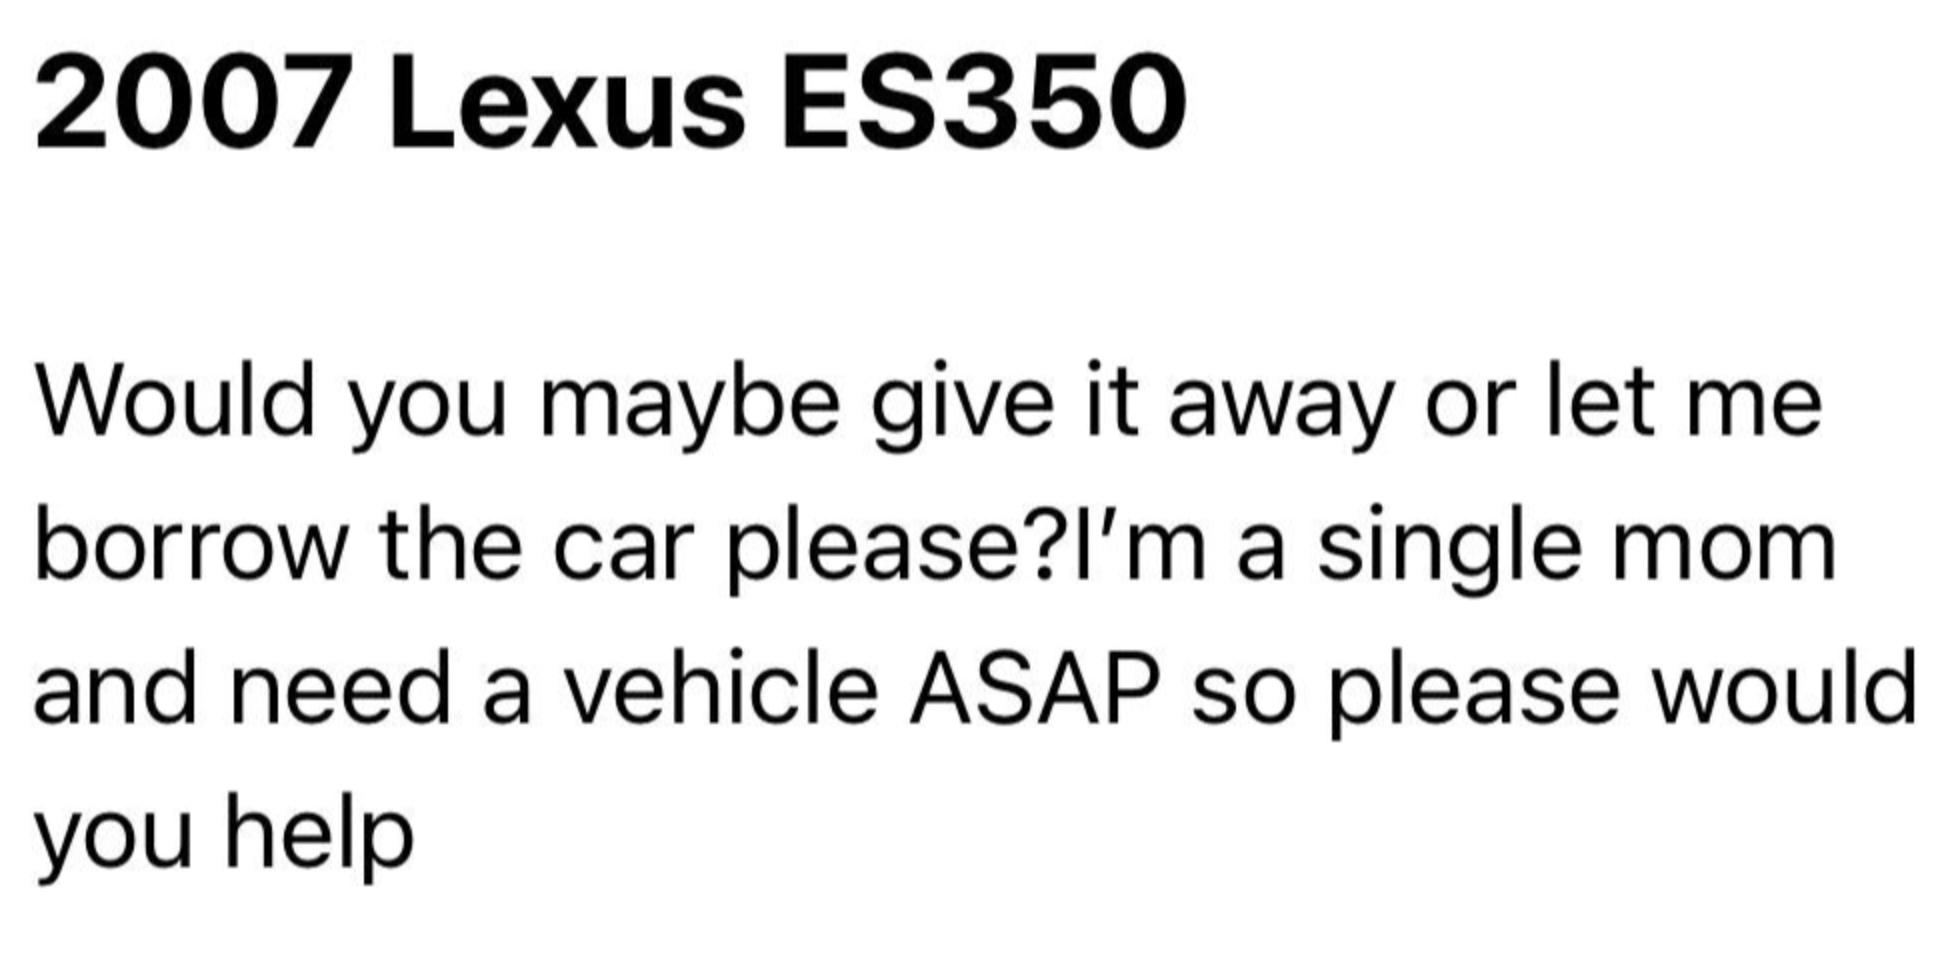 document - 2007 Lexus ES350 Would you maybe give it away or let me borrow the car please? I'm a single mom and need a vehicle Asap so please would you help